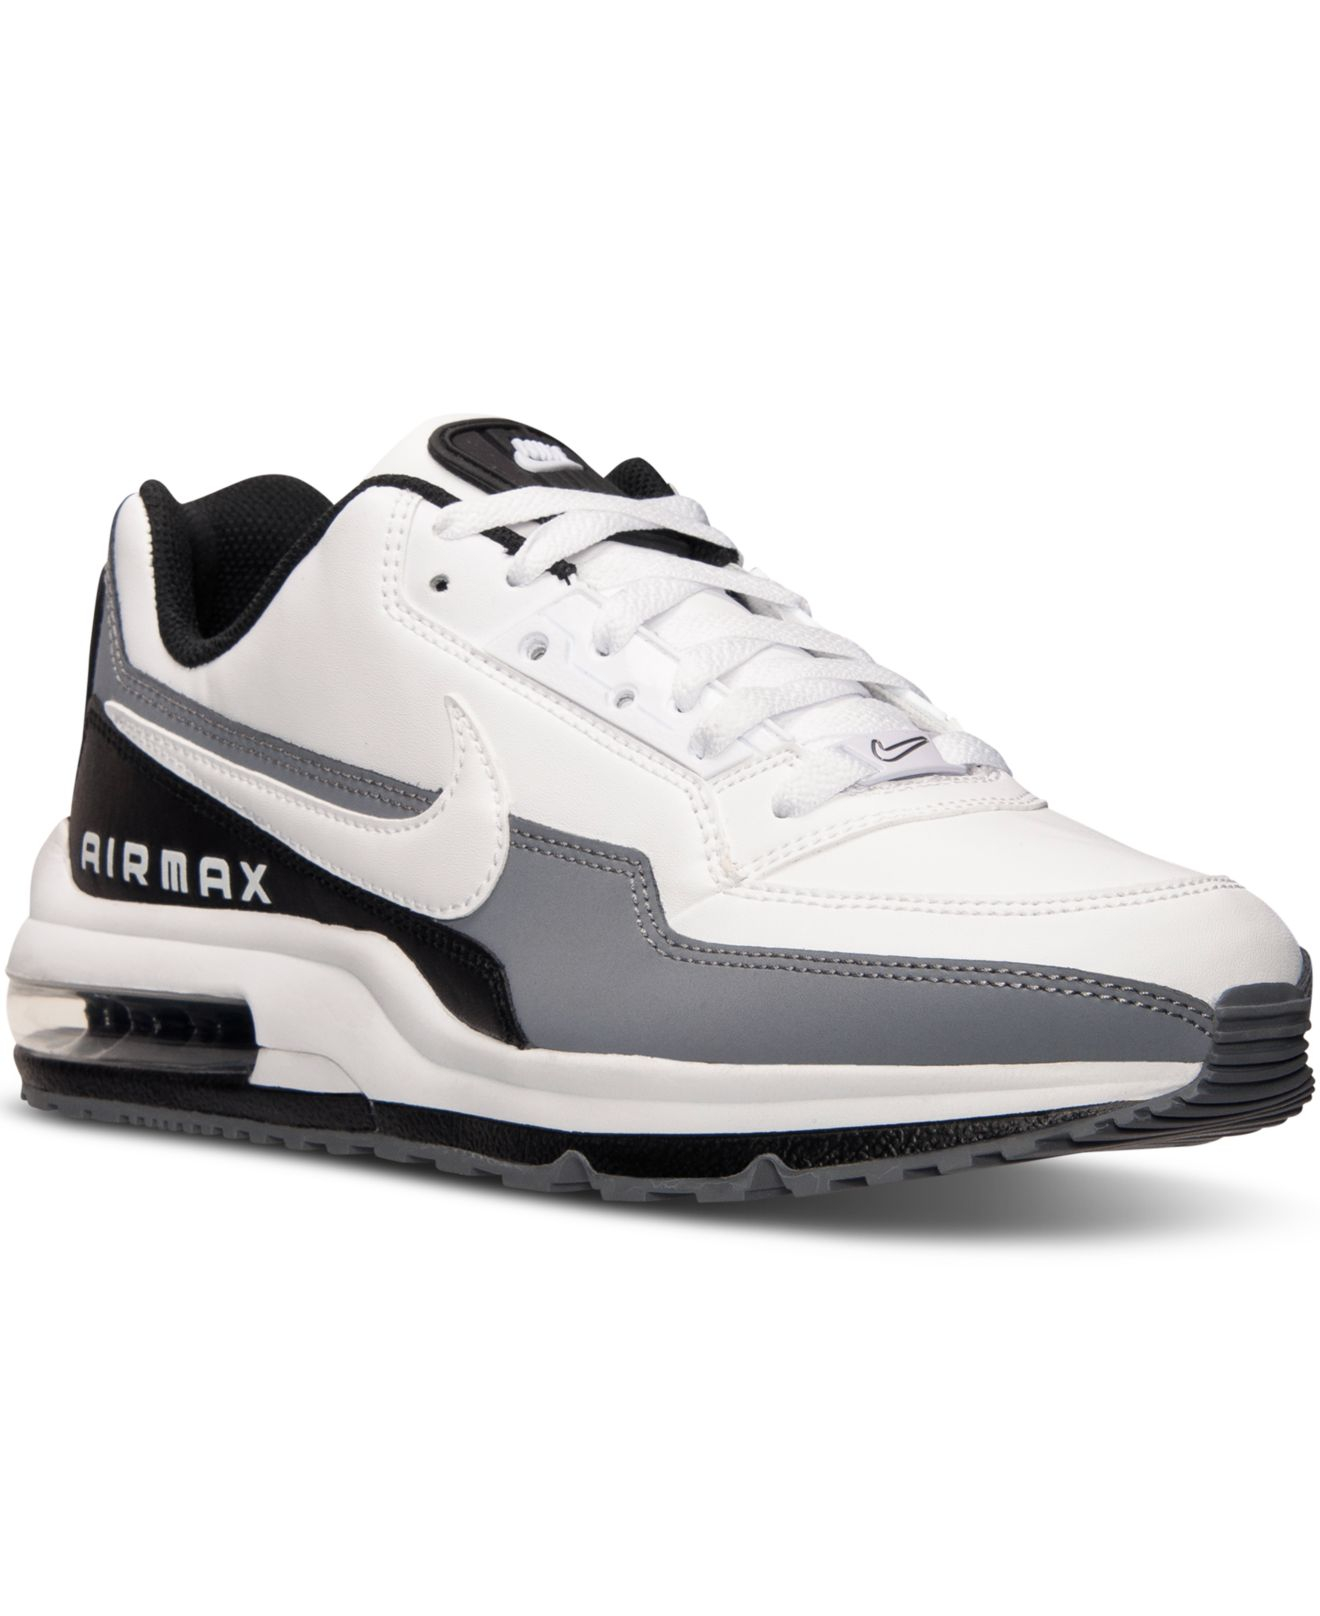 Nike Leather Men's Air Max Ltd 3 Running Sneakers From Finish Line in